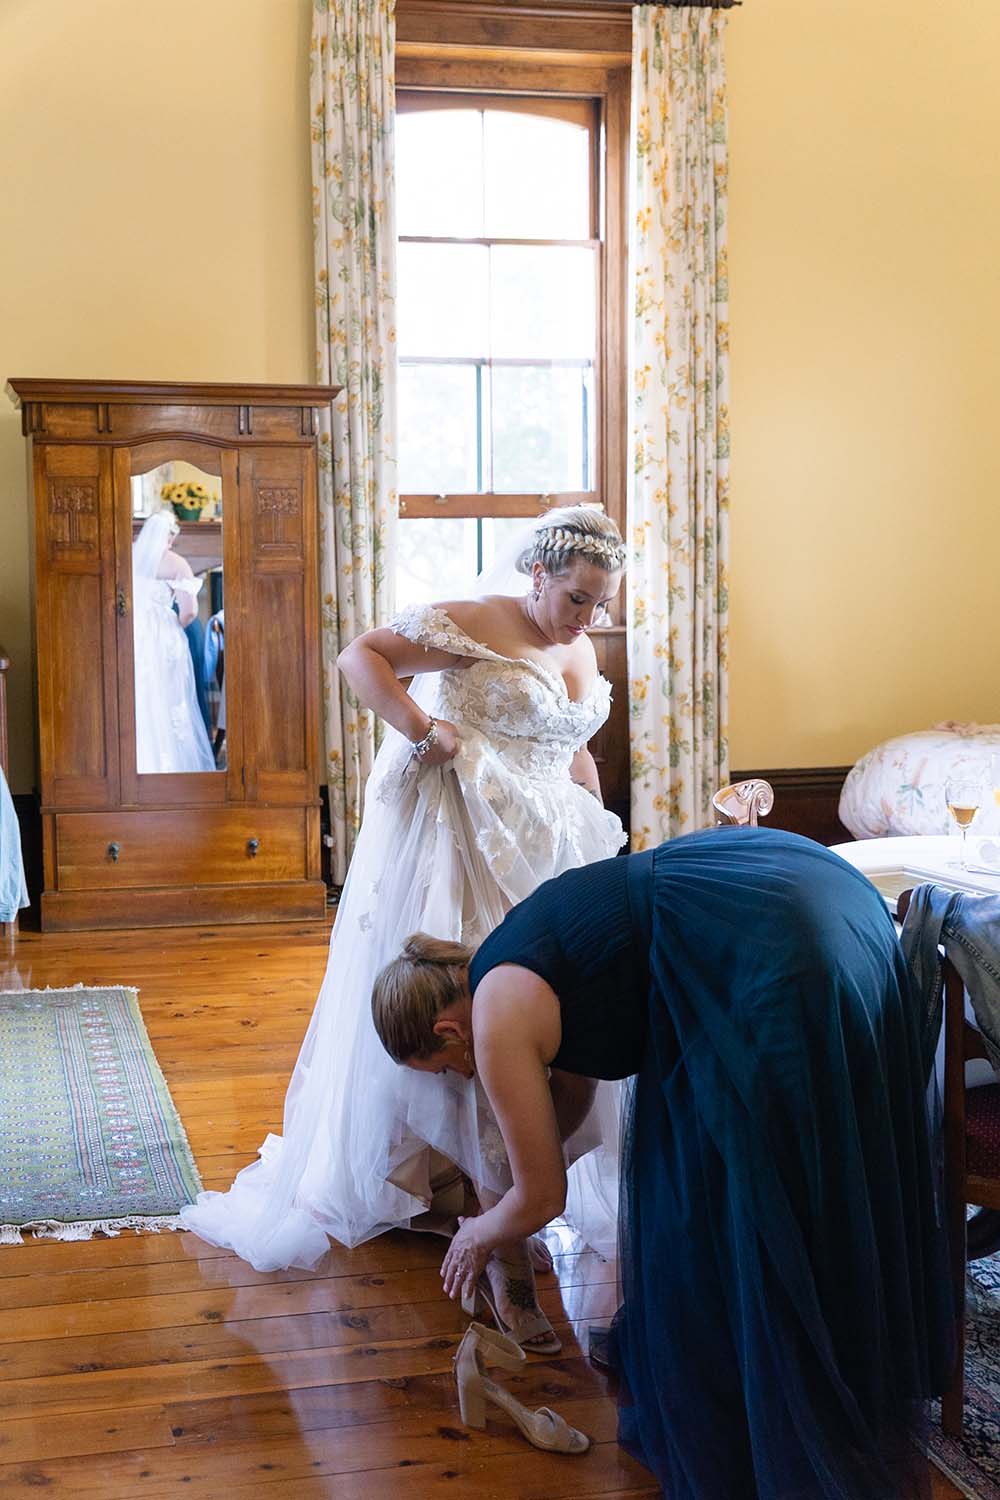 Wedding Photography - bride putting on shoes